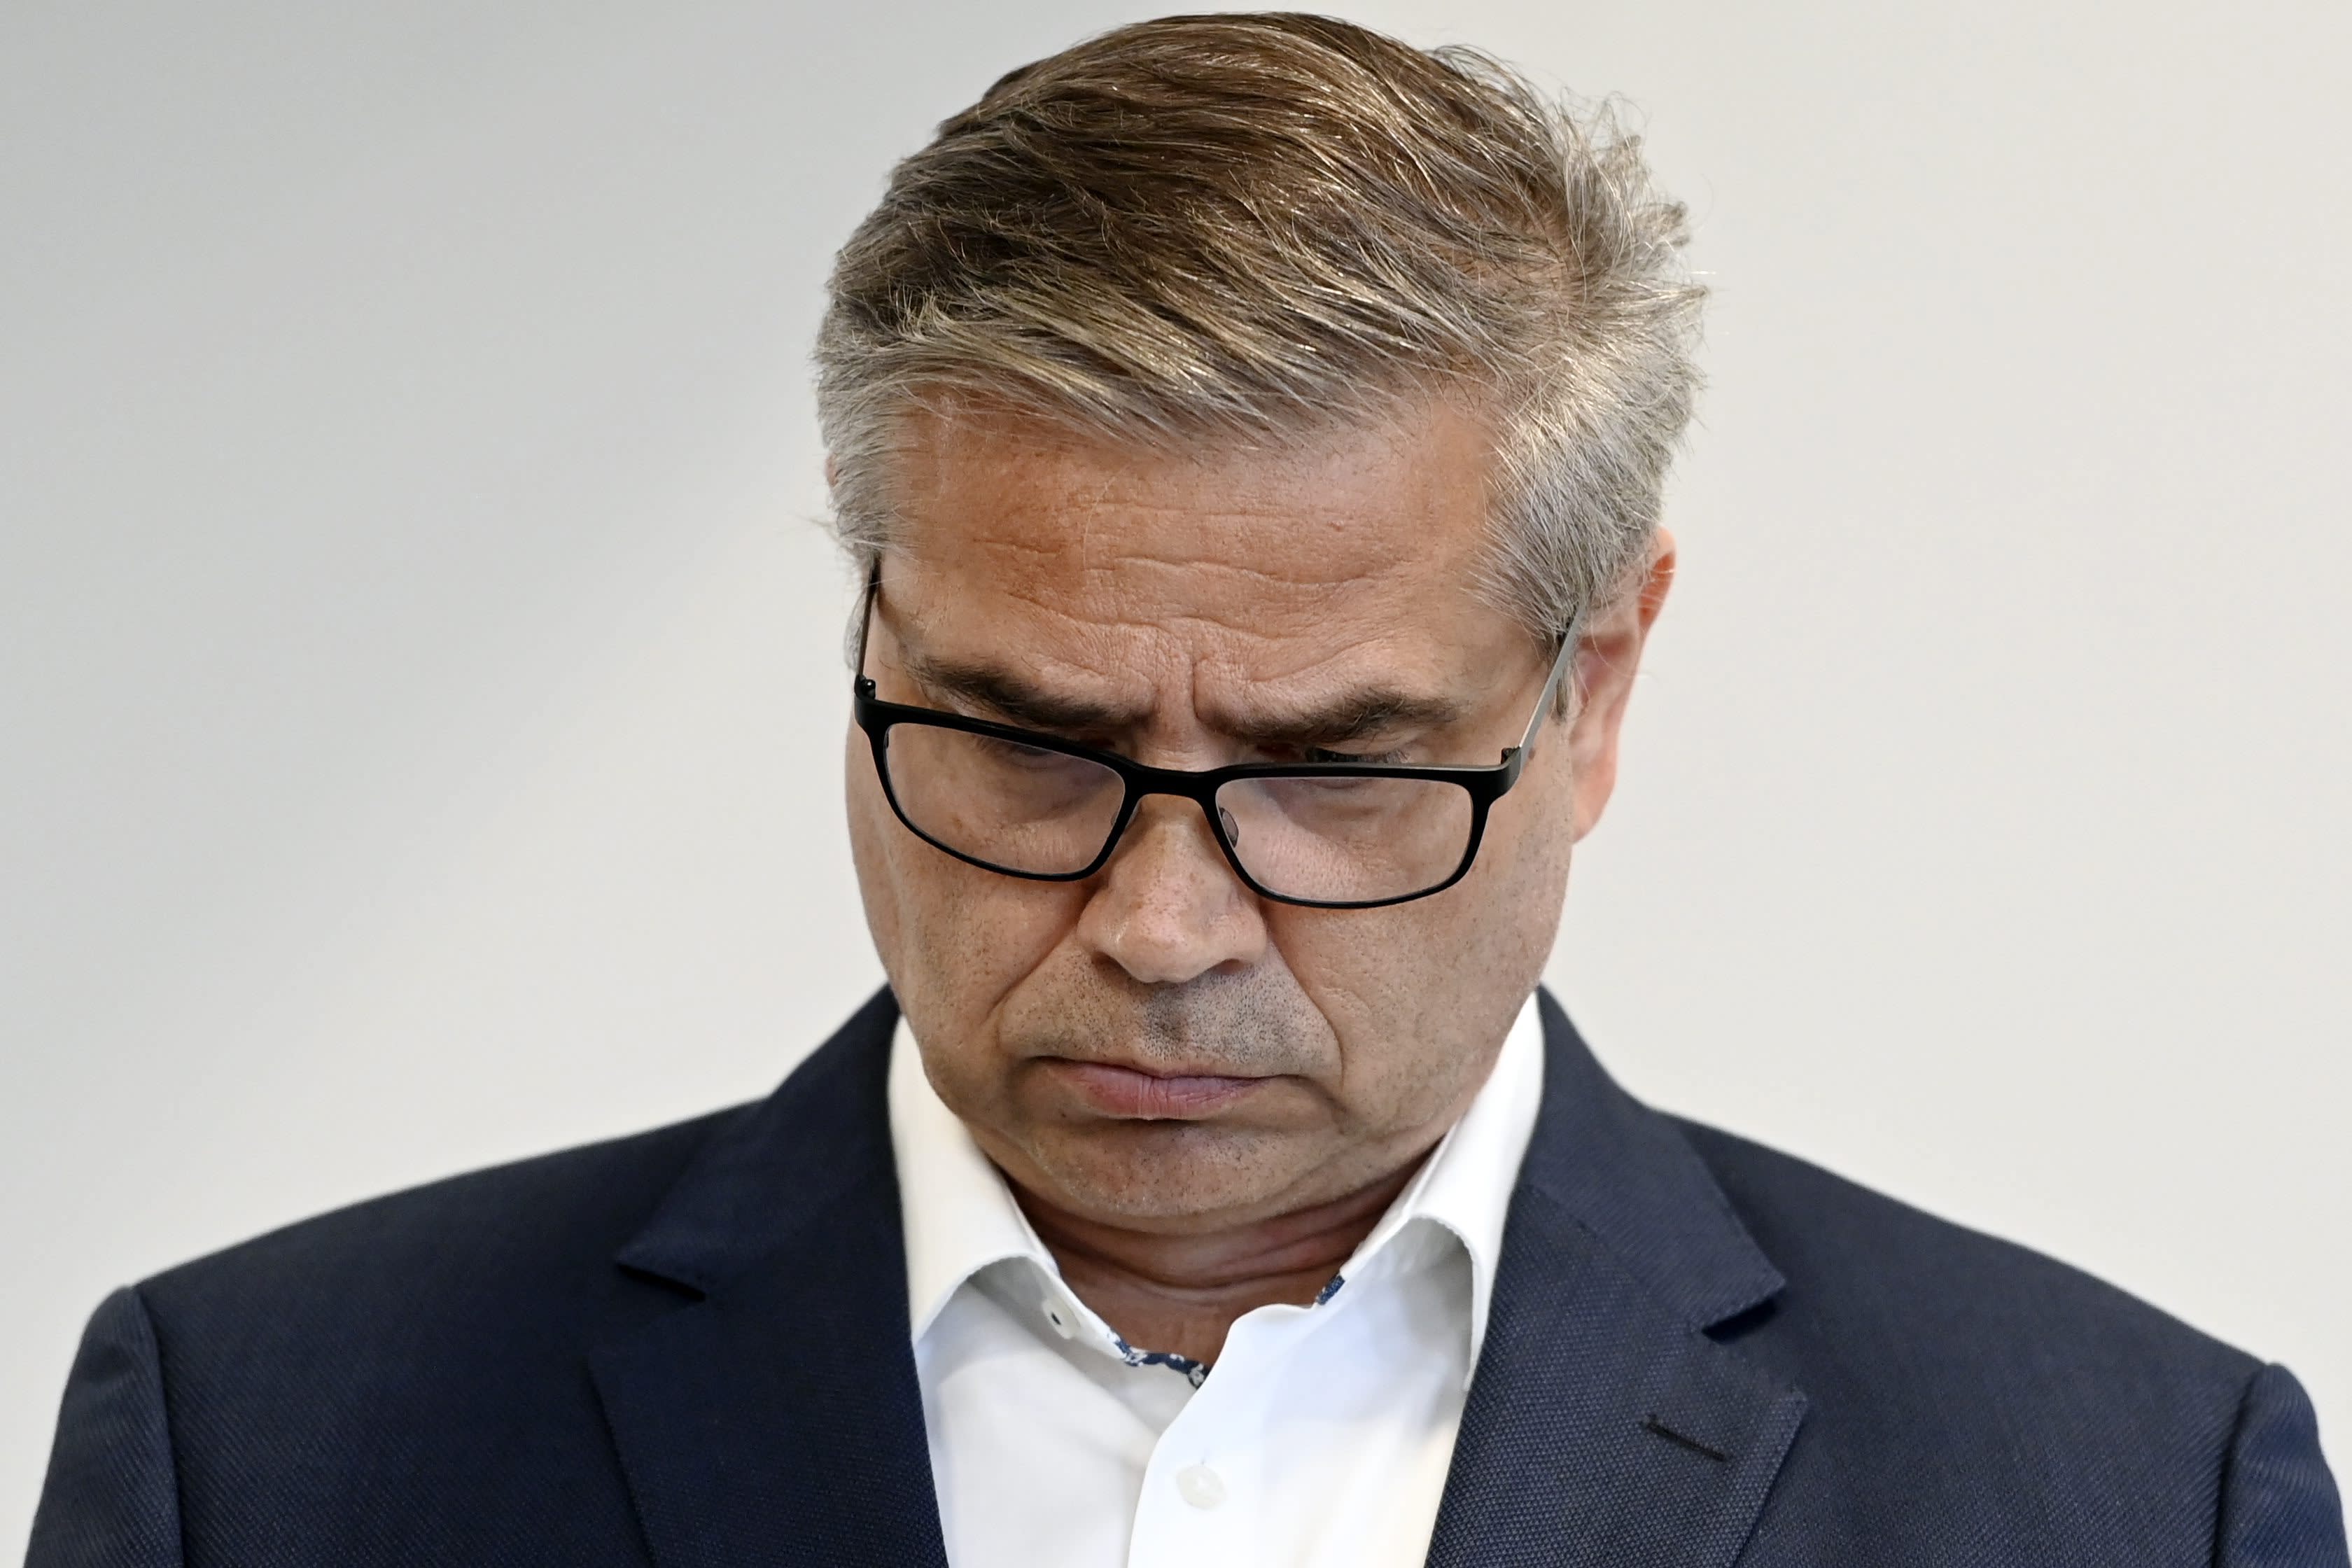 The chief official resigns from the Finnish Olympic Committee after late night texting